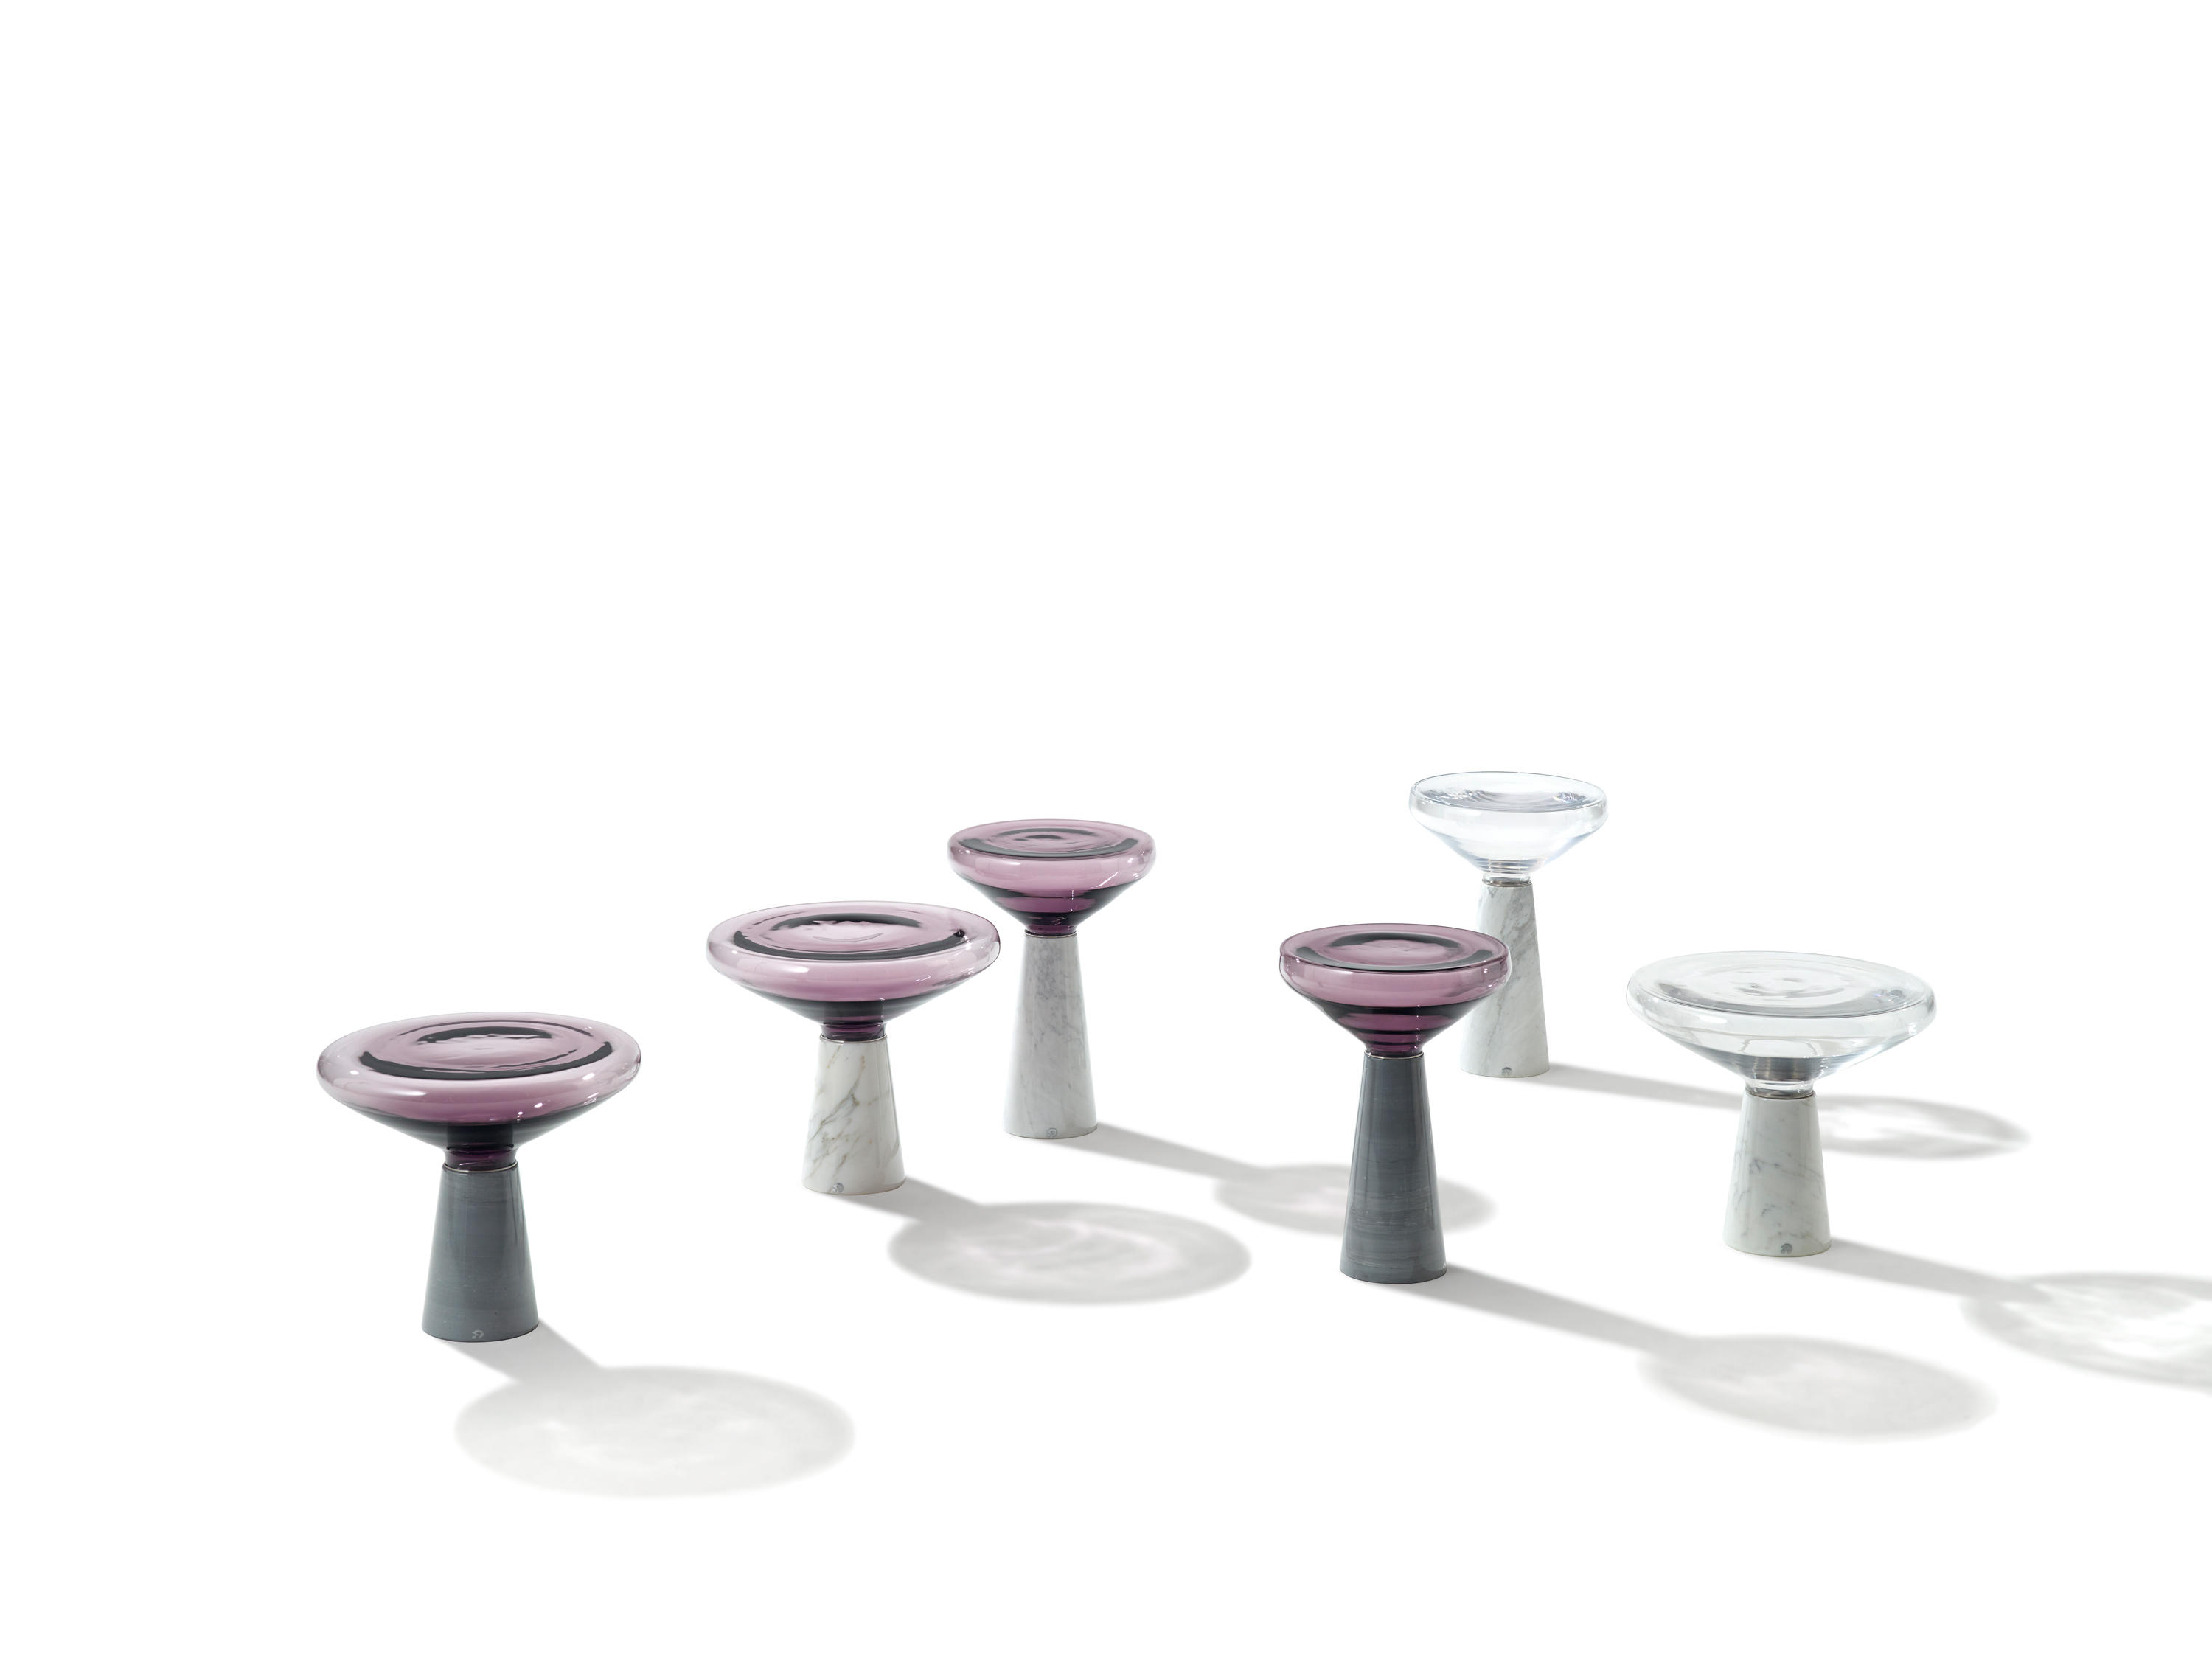 Blow Side Tables by Stephan Veit for Draenert